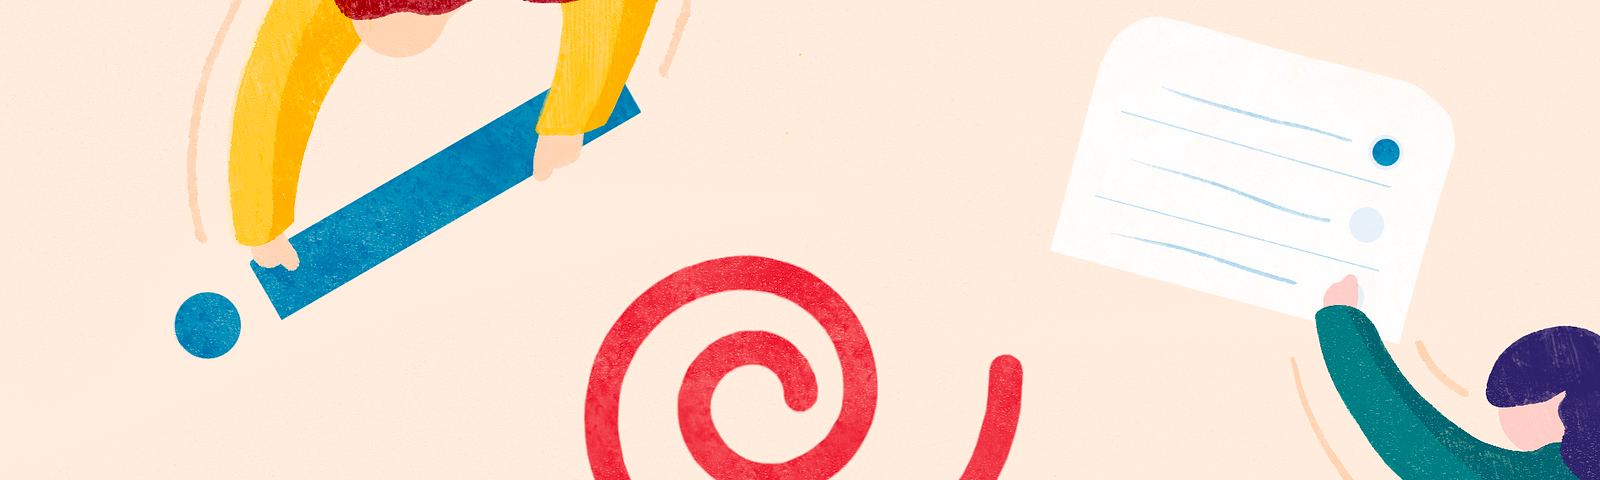 Illustration of people holding visual design elements. The middle element is a spiral form.